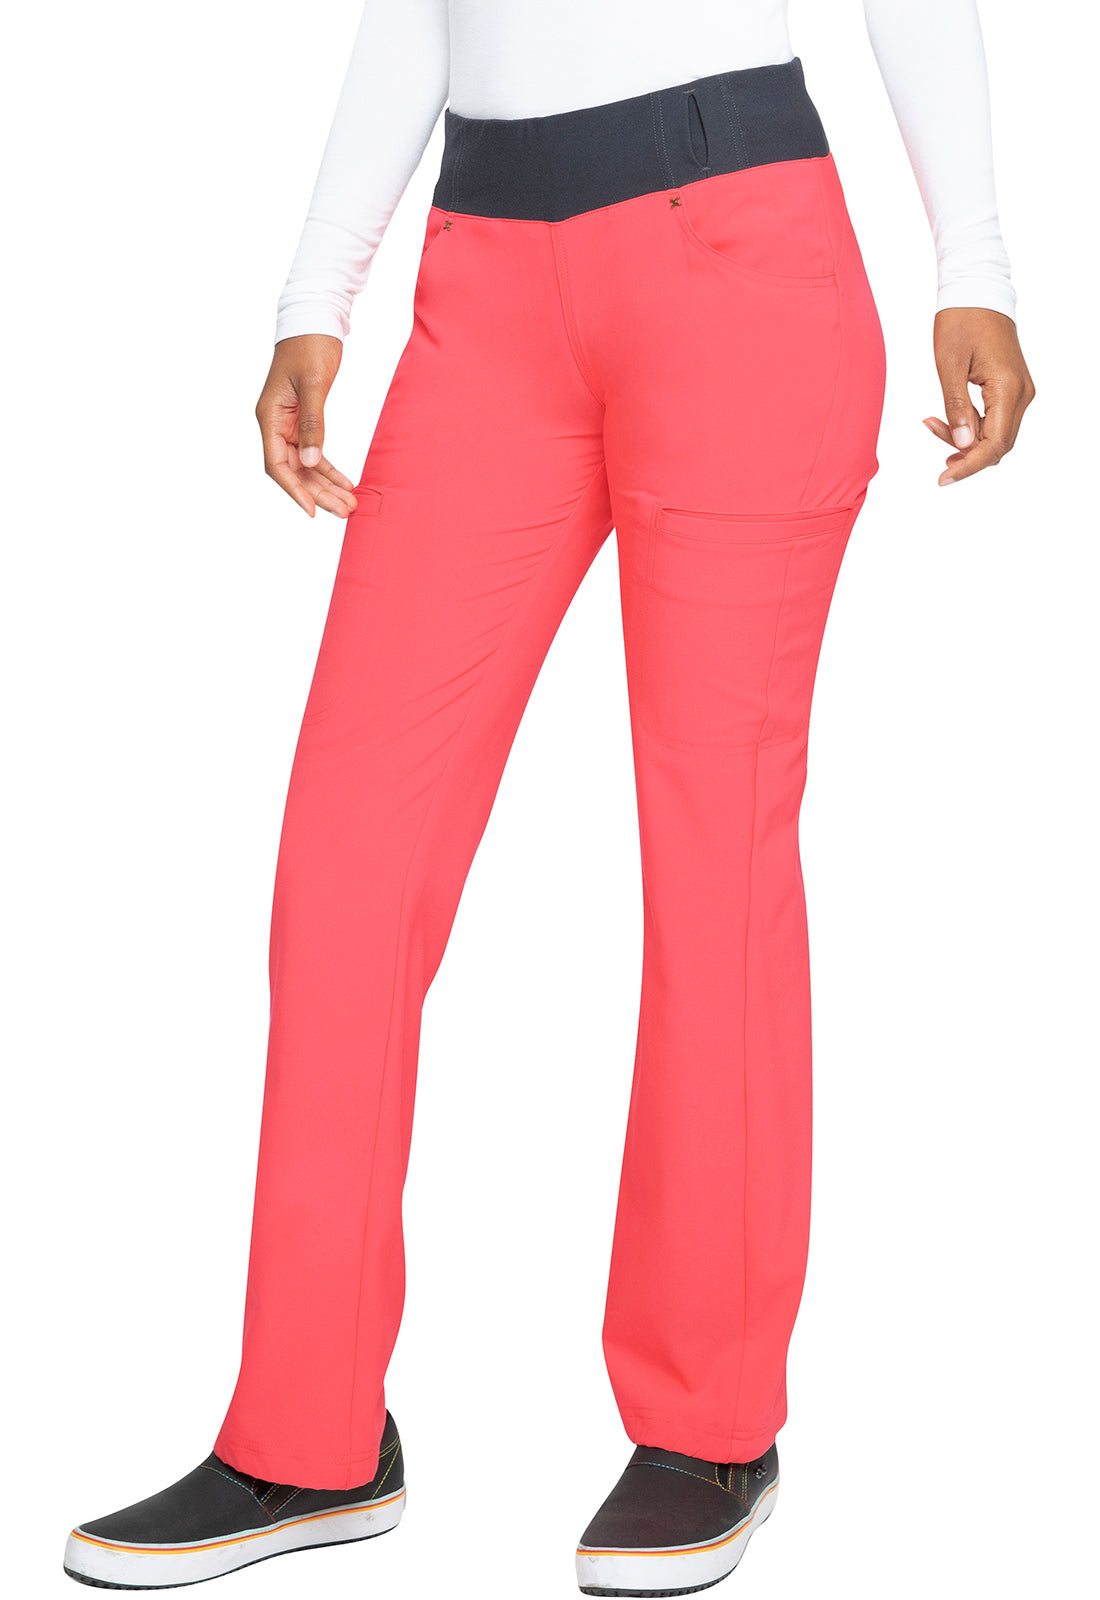 Buy ON & ON Women Straight Pant (3XL, New red) at